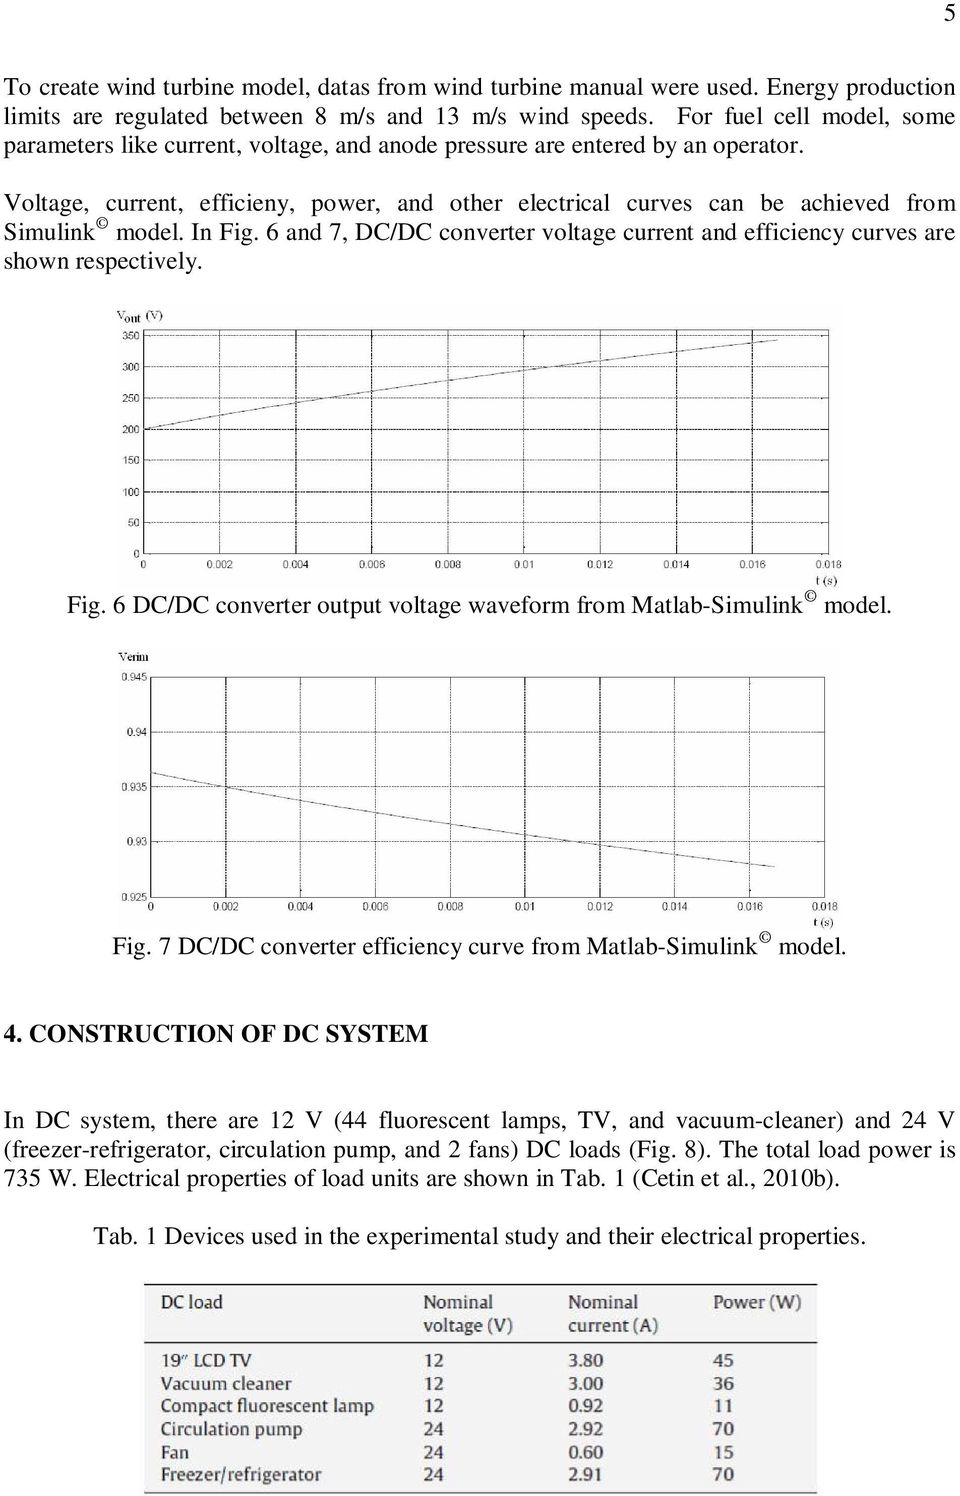 Voltage, current, efficieny, power, and other electrical curves can be achieved from Simulink model. In Fig. 6 and 7, DC/DC converter voltage current and efficiency curves are shown respectively. Fig. 6 DC/DC converter output voltage waveform from Matlab-Simulink model.